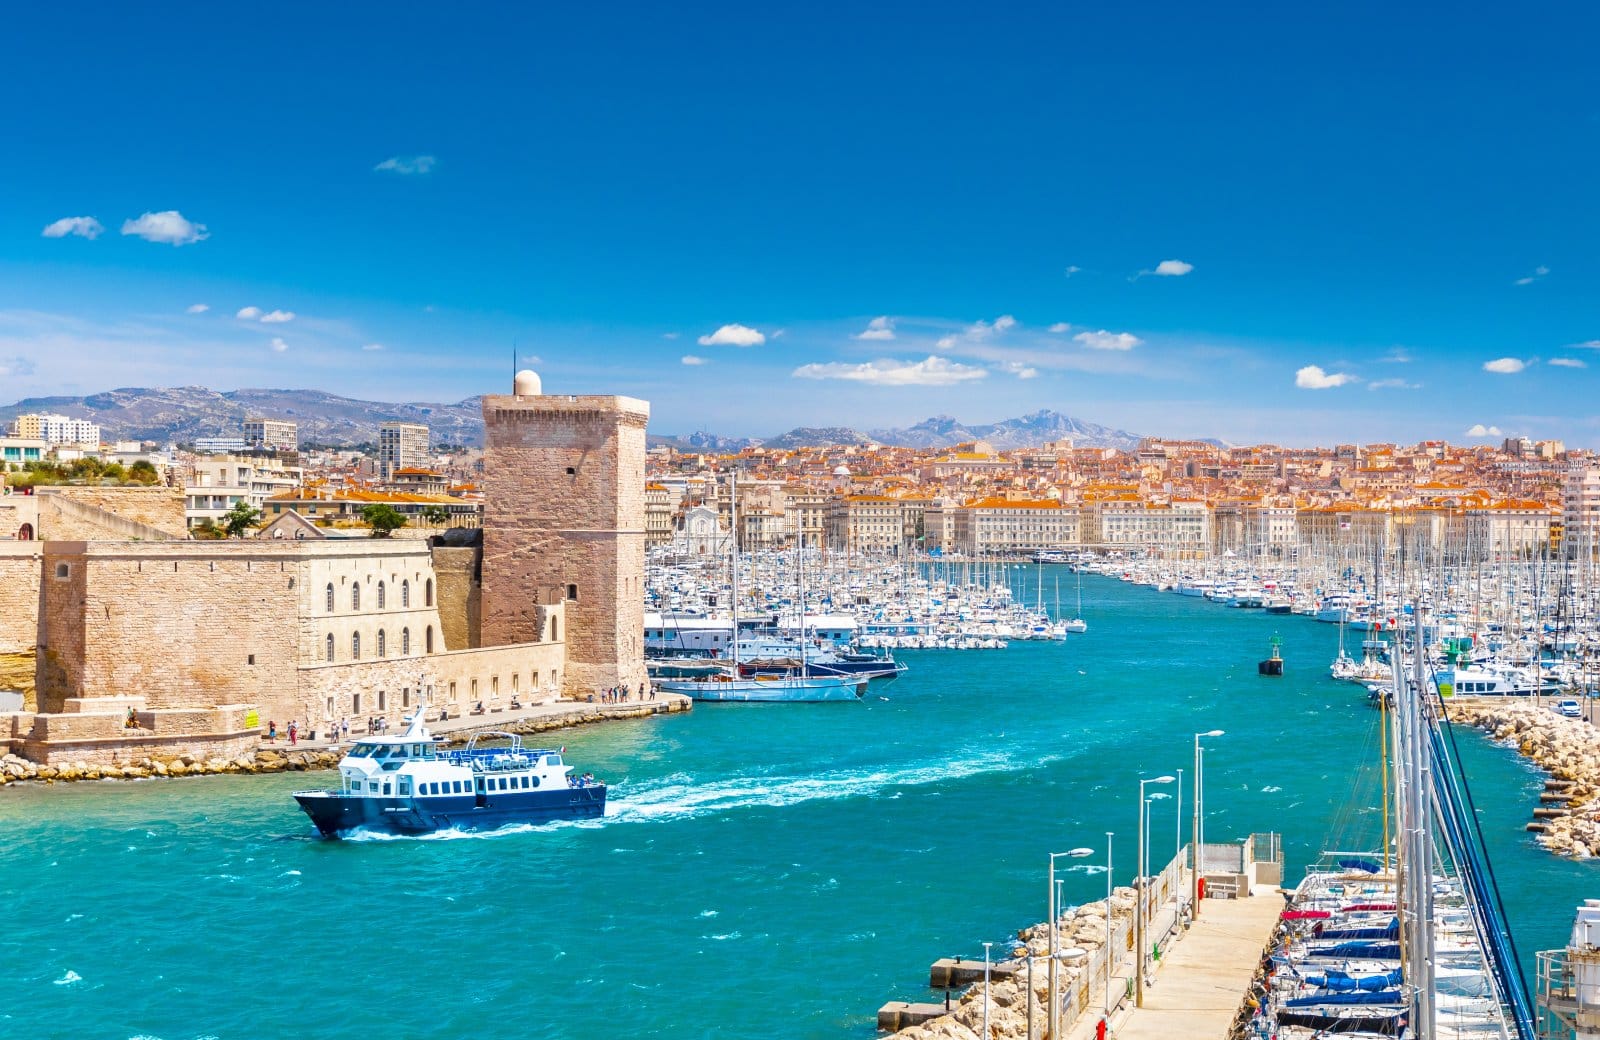 <p class="wp-caption-text">Image Credit: Shutterstock / proslgn</p>  <p><span>The French Riviera, or Côte d’Azur, is synonymous with glamour, breathtaking scenery, and exceptional sailing conditions. Stretching from the Italian border to the east and down to Saint-Tropez, this legendary coastline offers a unique blend of natural beauty, luxurious resorts, and historic towns. Sailing here means cruising past the famed cities of Nice, Cannes, and Monaco, where the international jet set gathers, and discovering secluded coves and islands like the Îles de Lérins. The region’s consistent winds and mild climate make it a favorite among sailors seeking leisurely cruises and competitive regattas.</span></p>